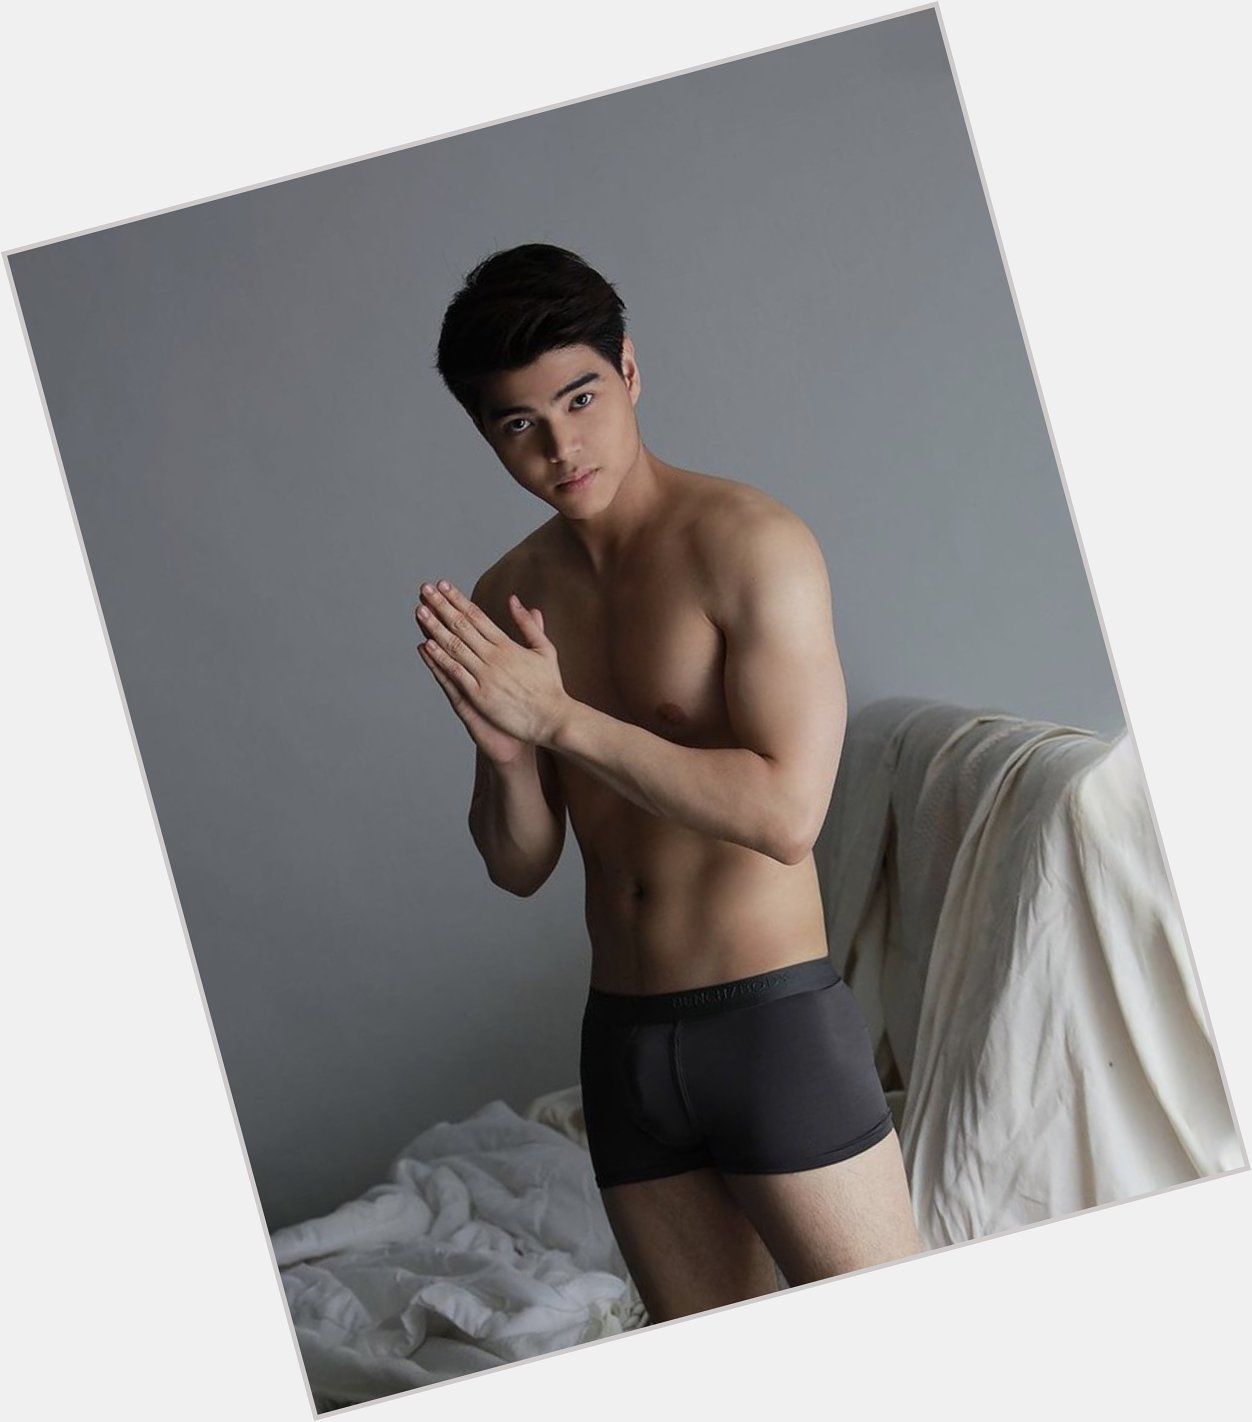 And here comes another one from Bench! Happy birthday, Paul Salas!
.
Photo: IG/benchbodyph 